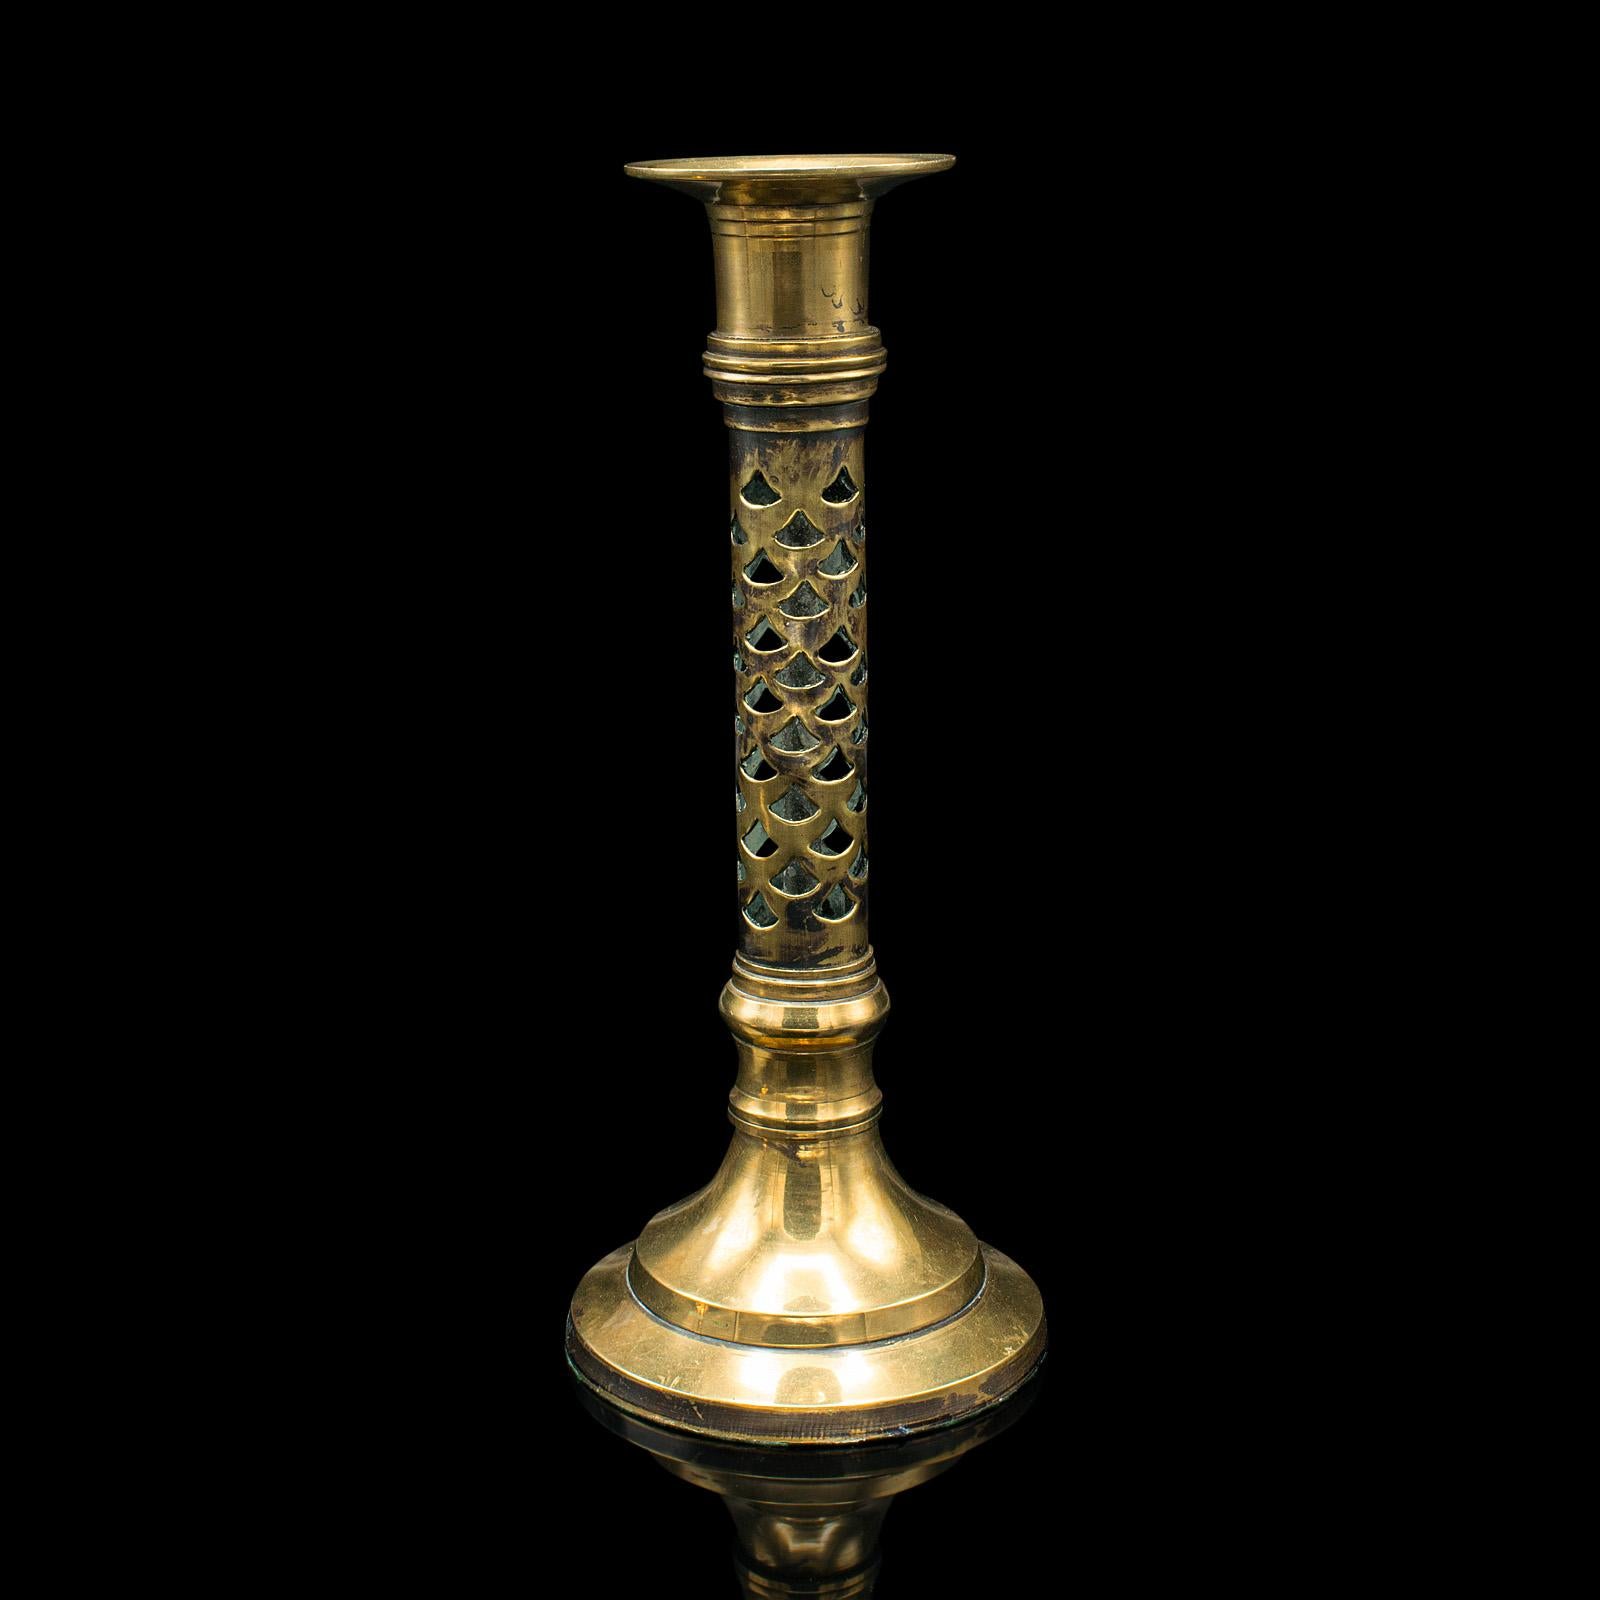 Antique Ecclesiastical Candlesticks, English, Brass, Aesthetic Period, Victorian For Sale 1